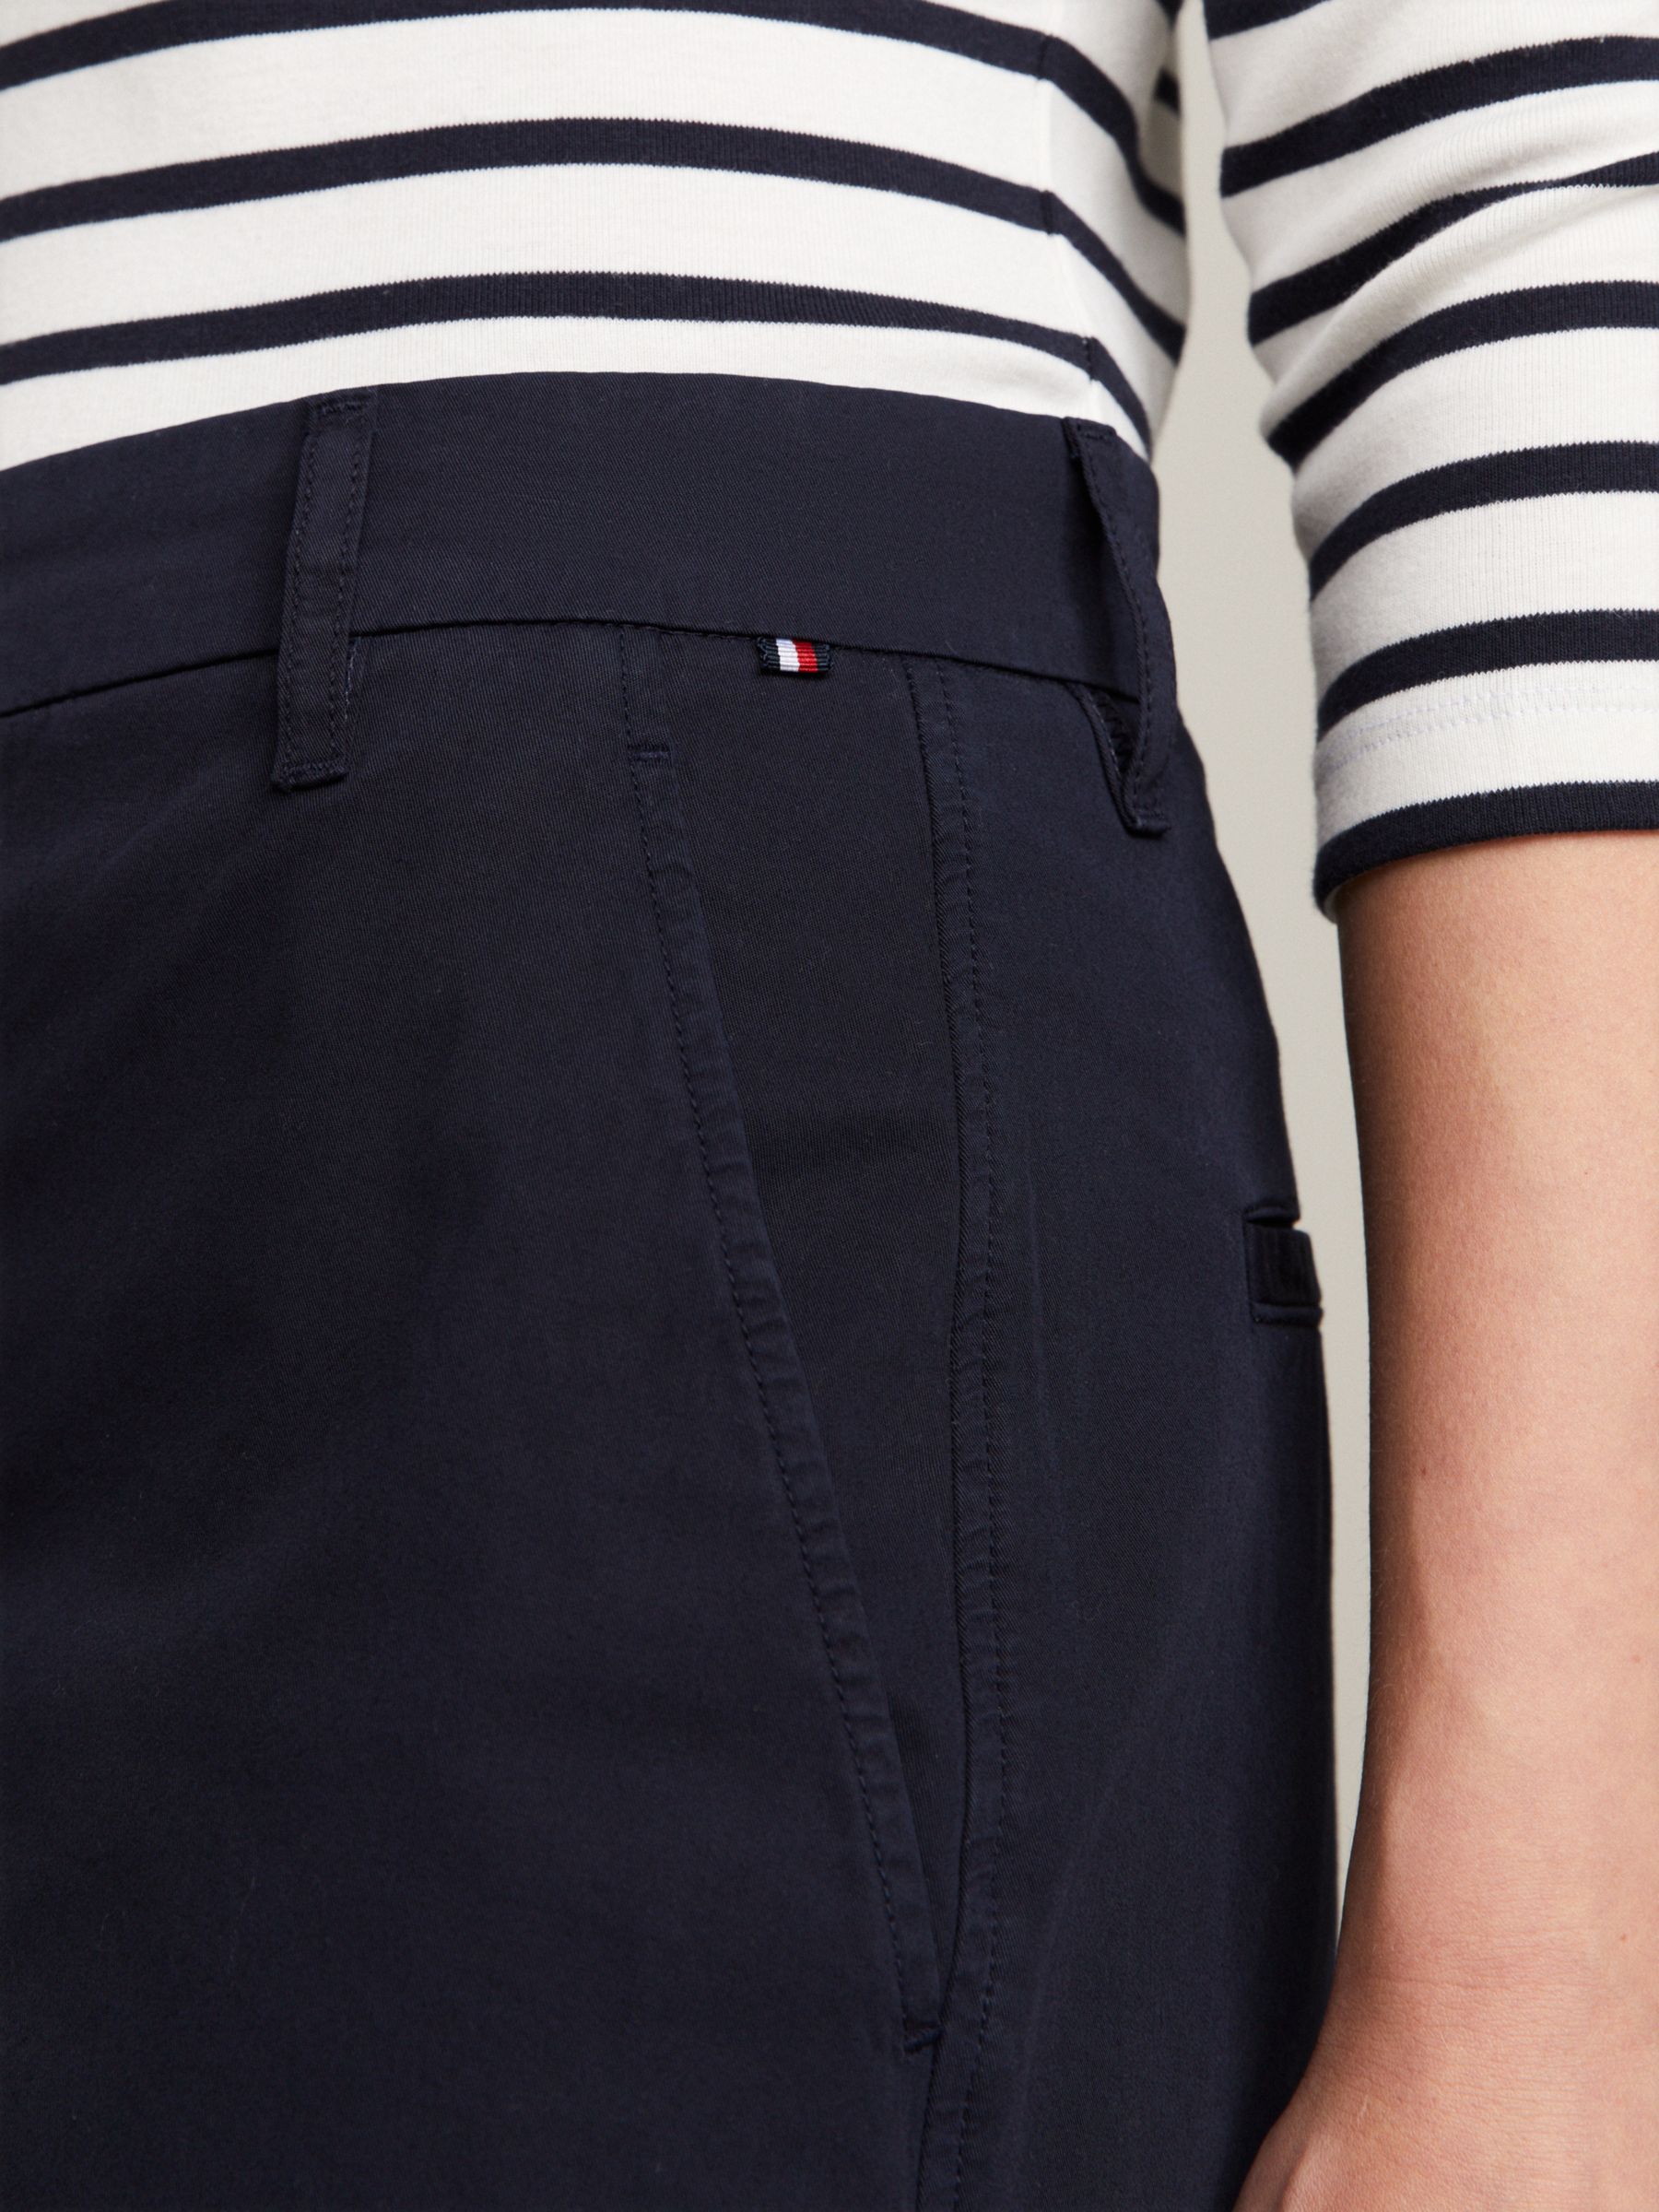 Buy Tommy Hilfiger Chino Shorts Online at johnlewis.com